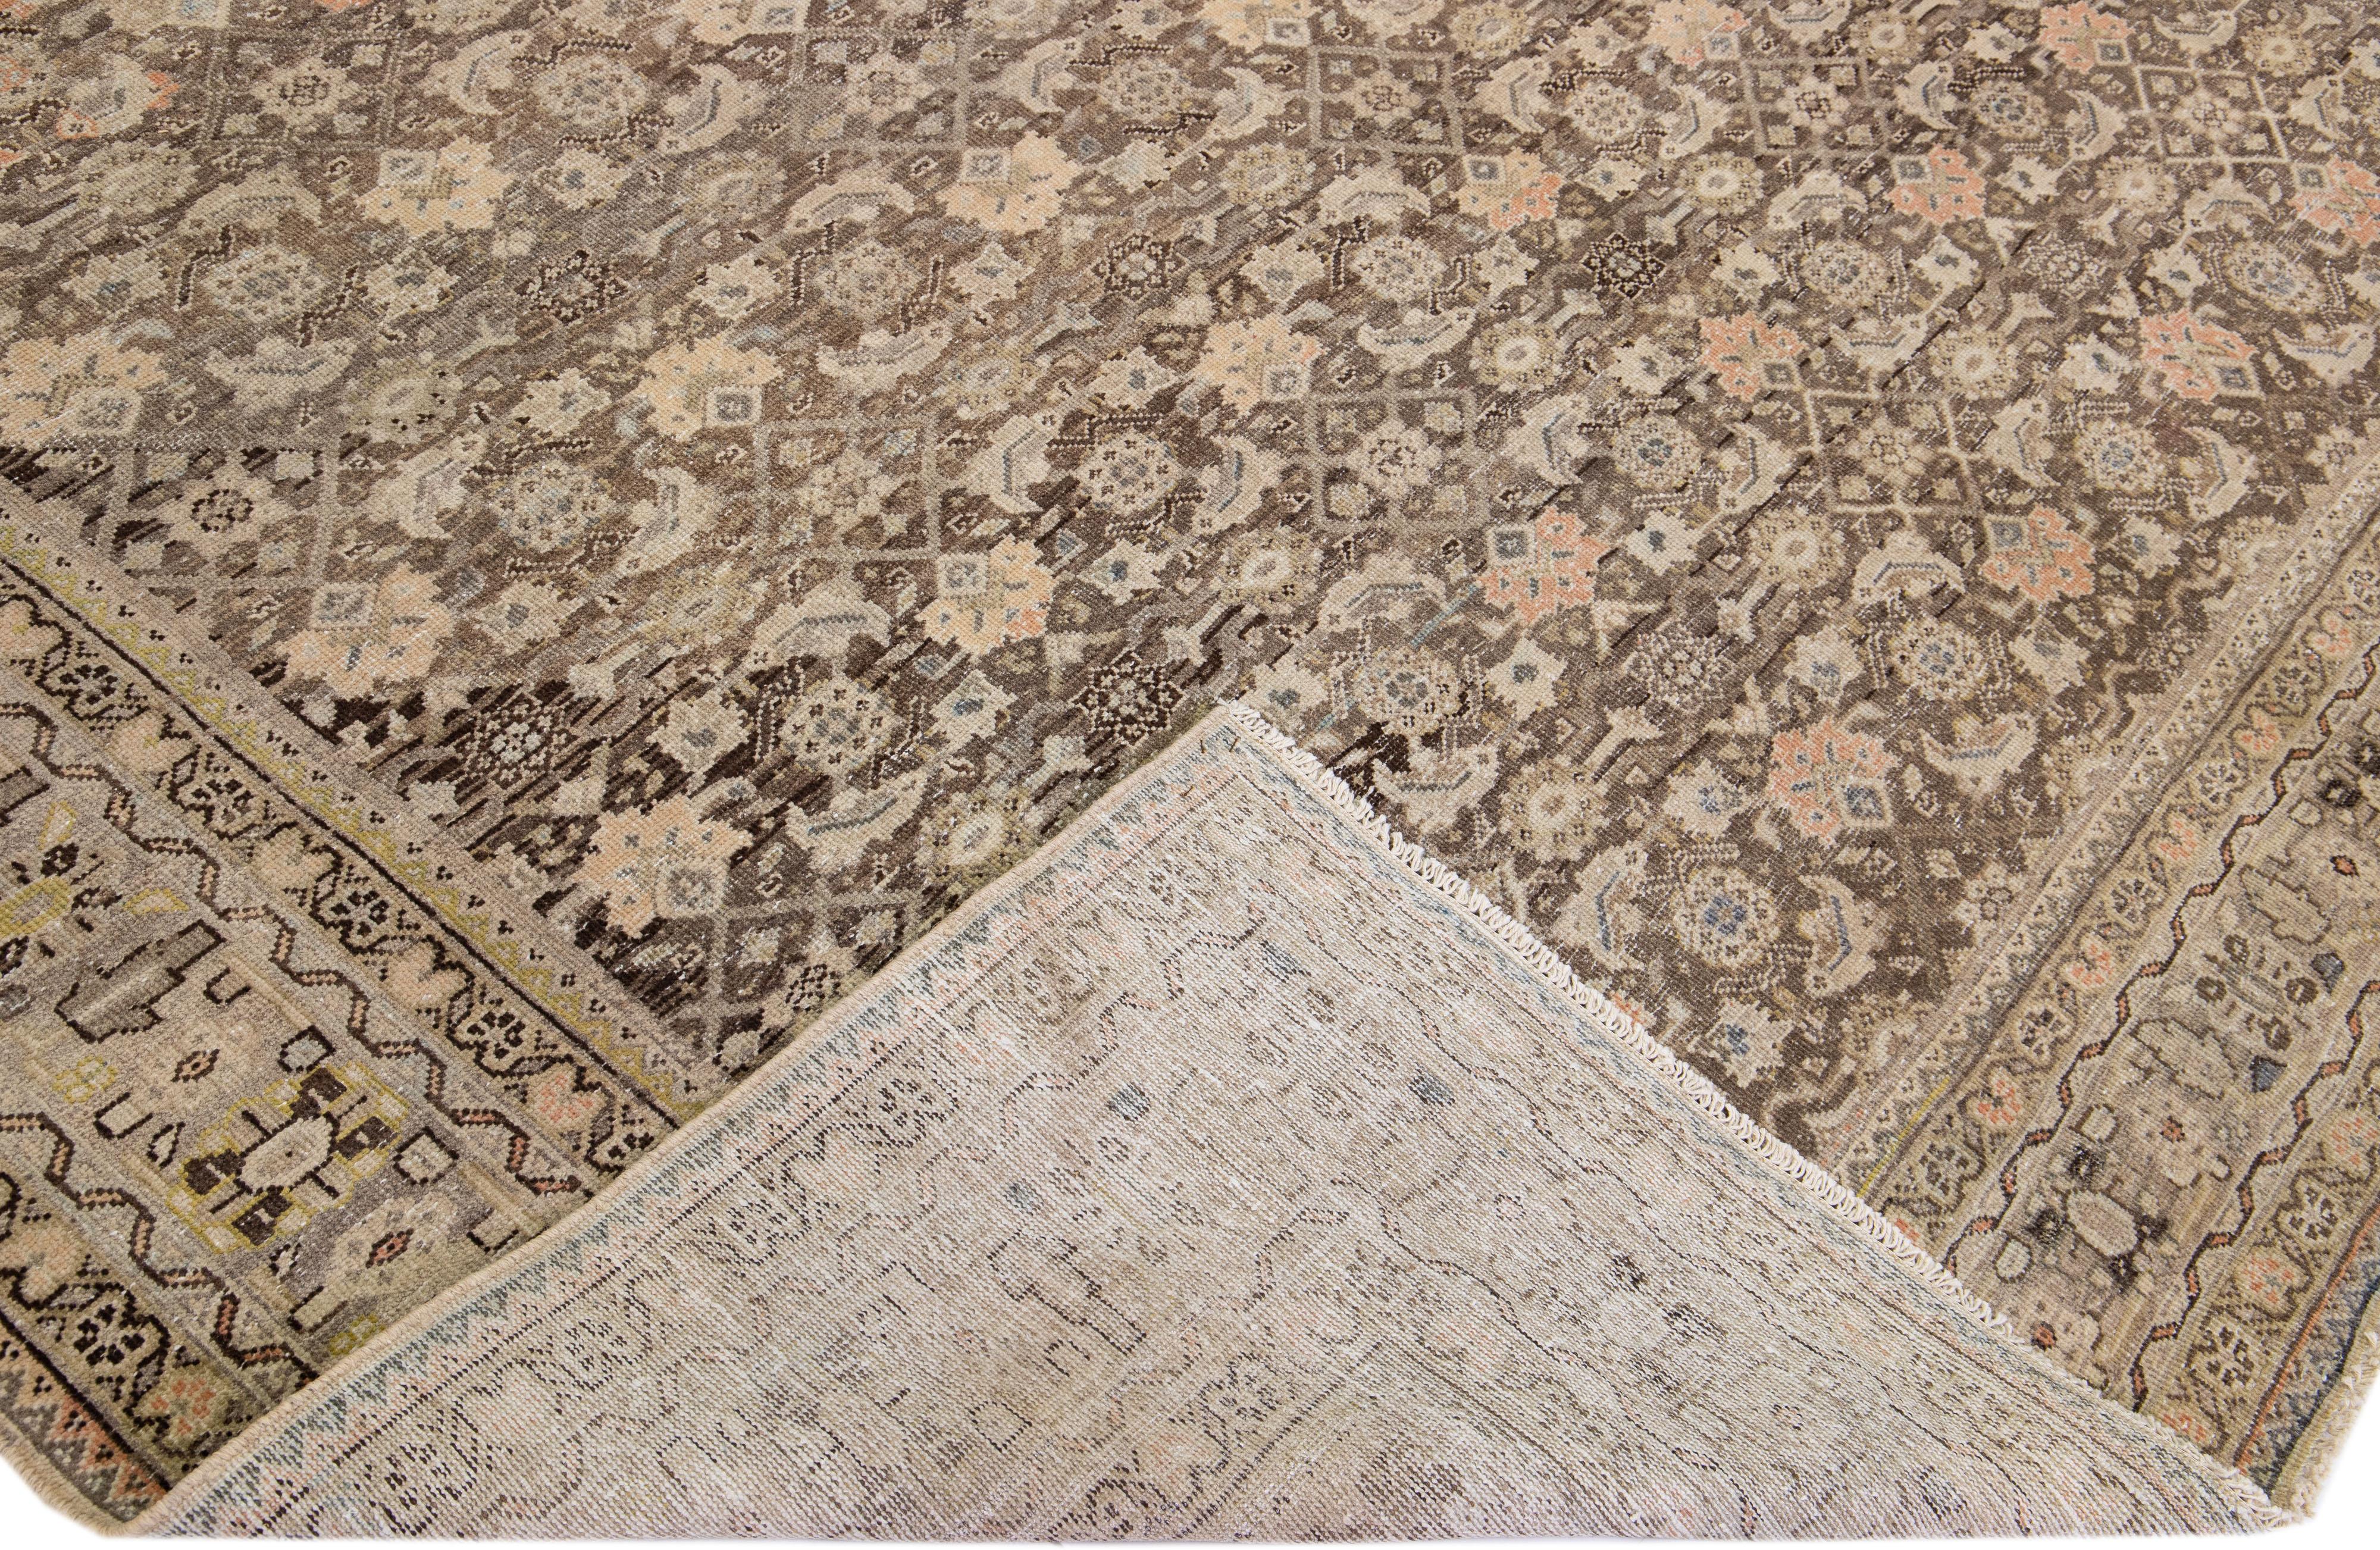 Beautiful antique Malayer hand-knotted wool rug with a brown color field. This Malayer piece has a designed frame with gray, peach, and yellow accents in a gorgeous all-over geometric pattern design.

This rug measures: 9'8